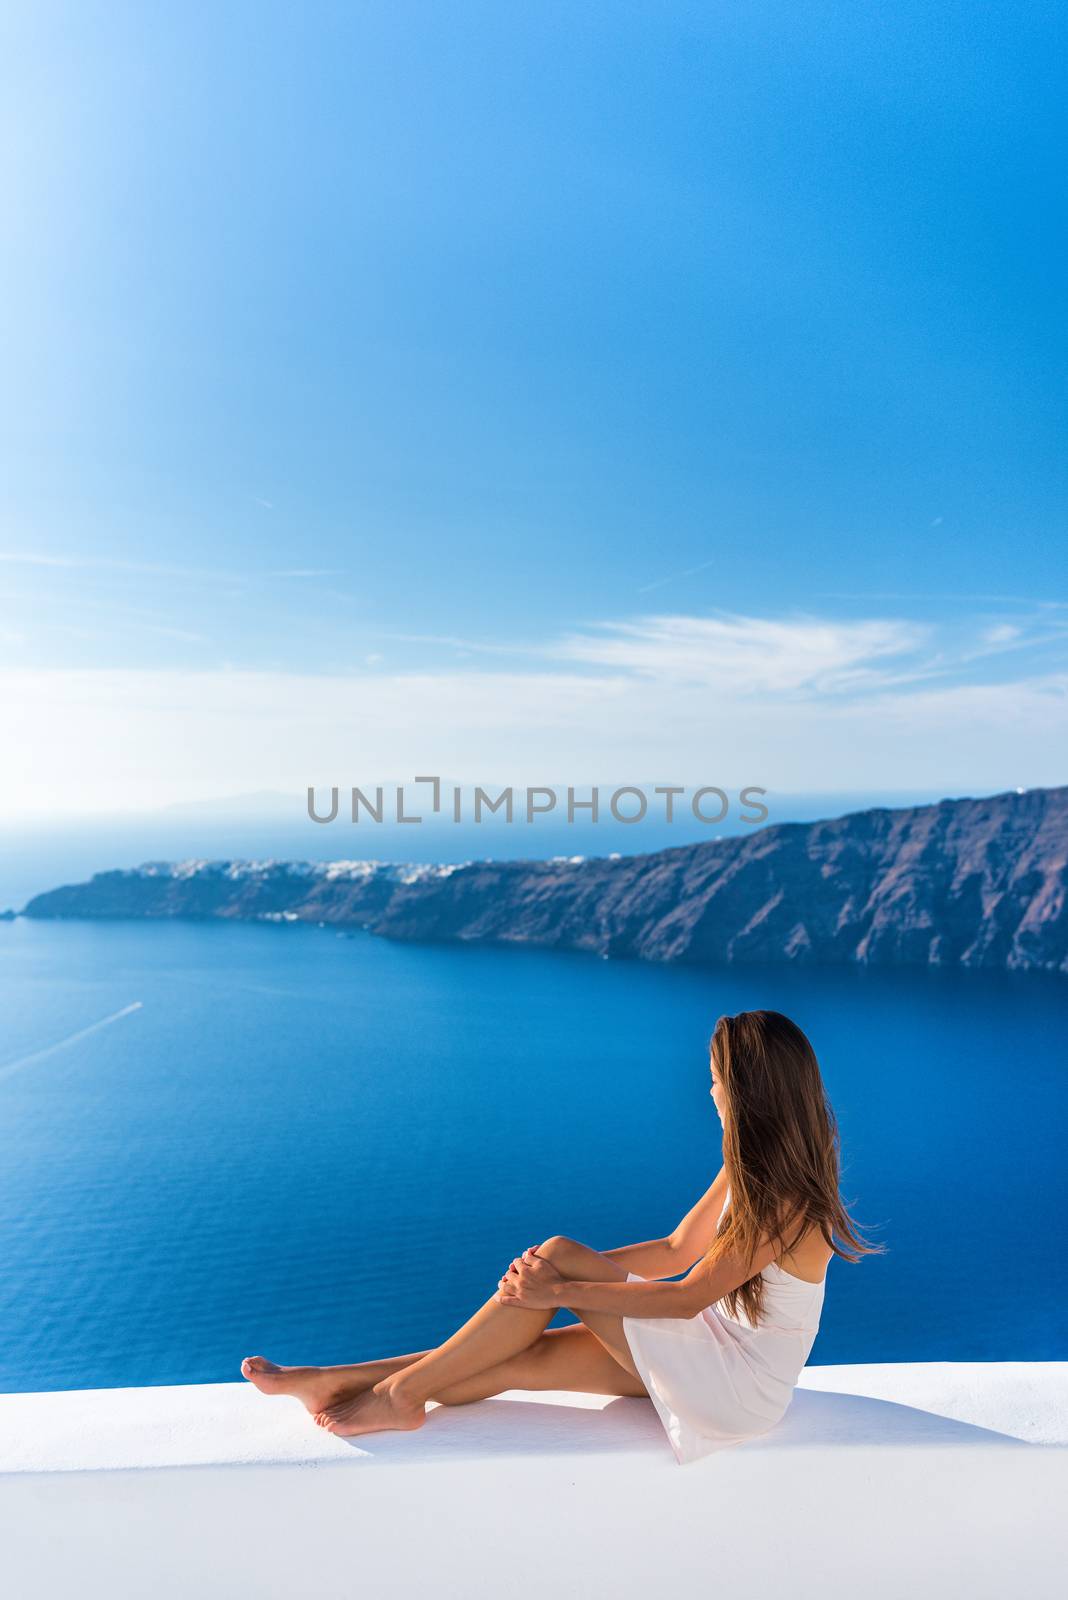 Luxury travel vacation Europe tourist woman relaxing at fancy hotel resort balcony in greek Santorini island, Greece with view over the Mediterranean Sea and Oia. Elegant girl living jetset lifestyle by Maridav